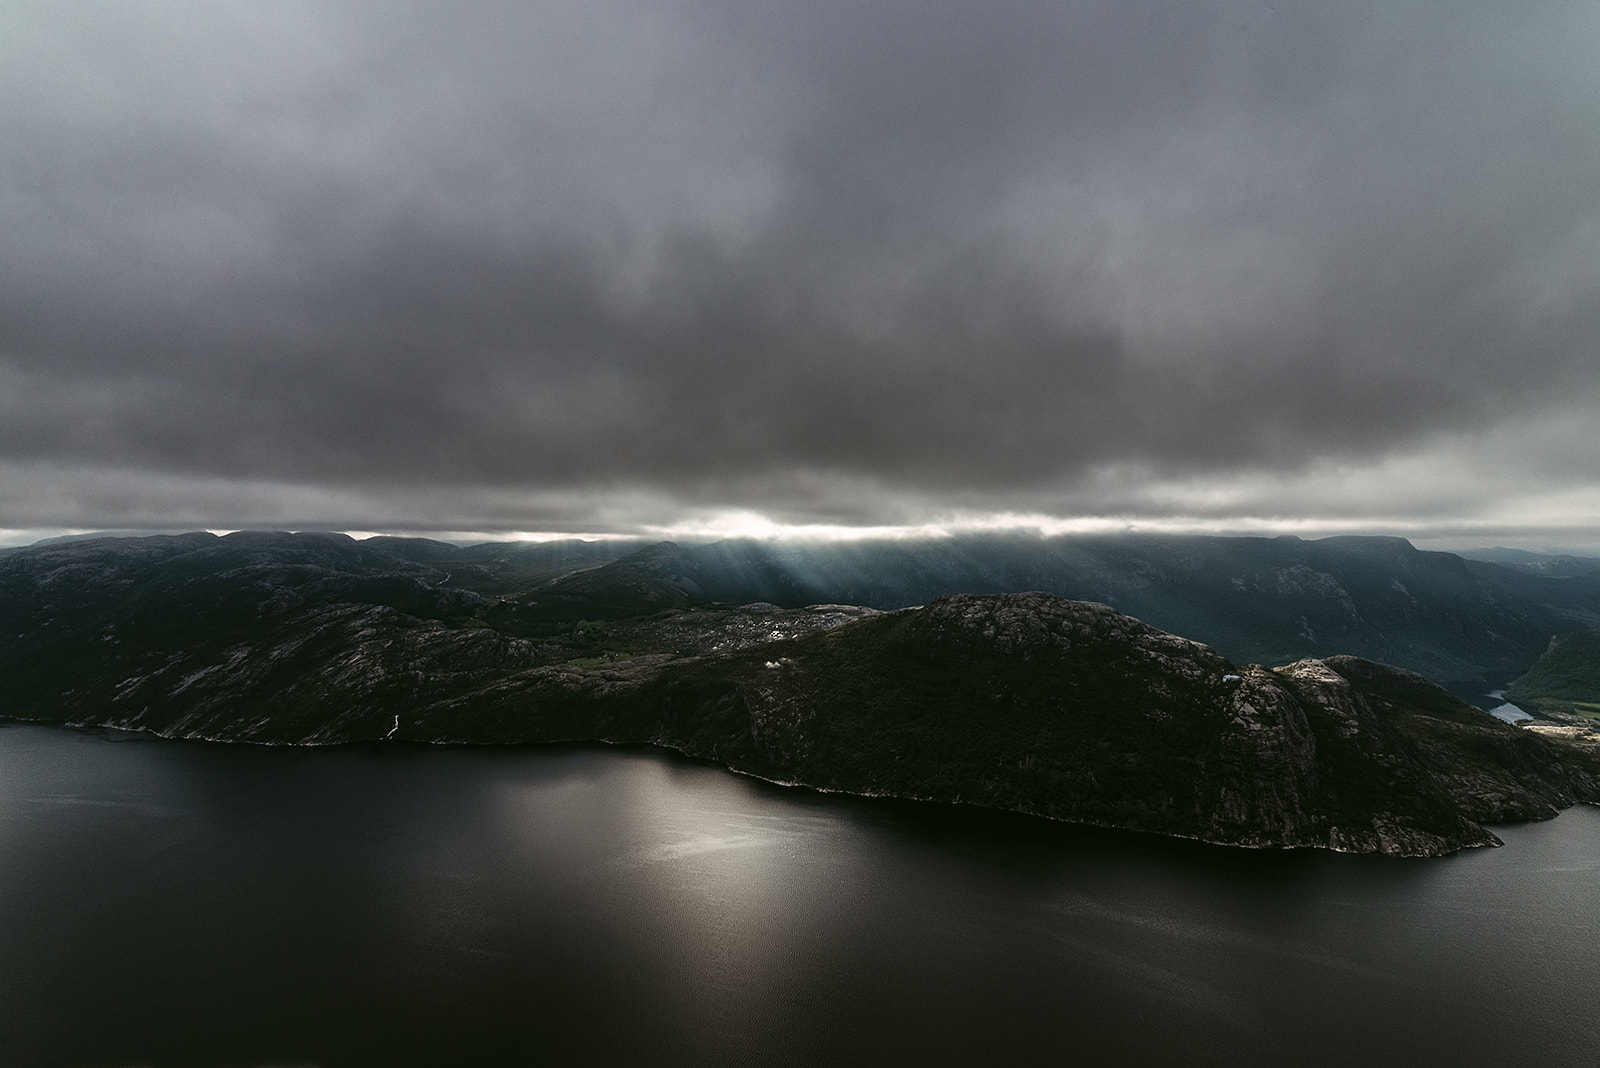 Lookout at fjord under dramatic sky